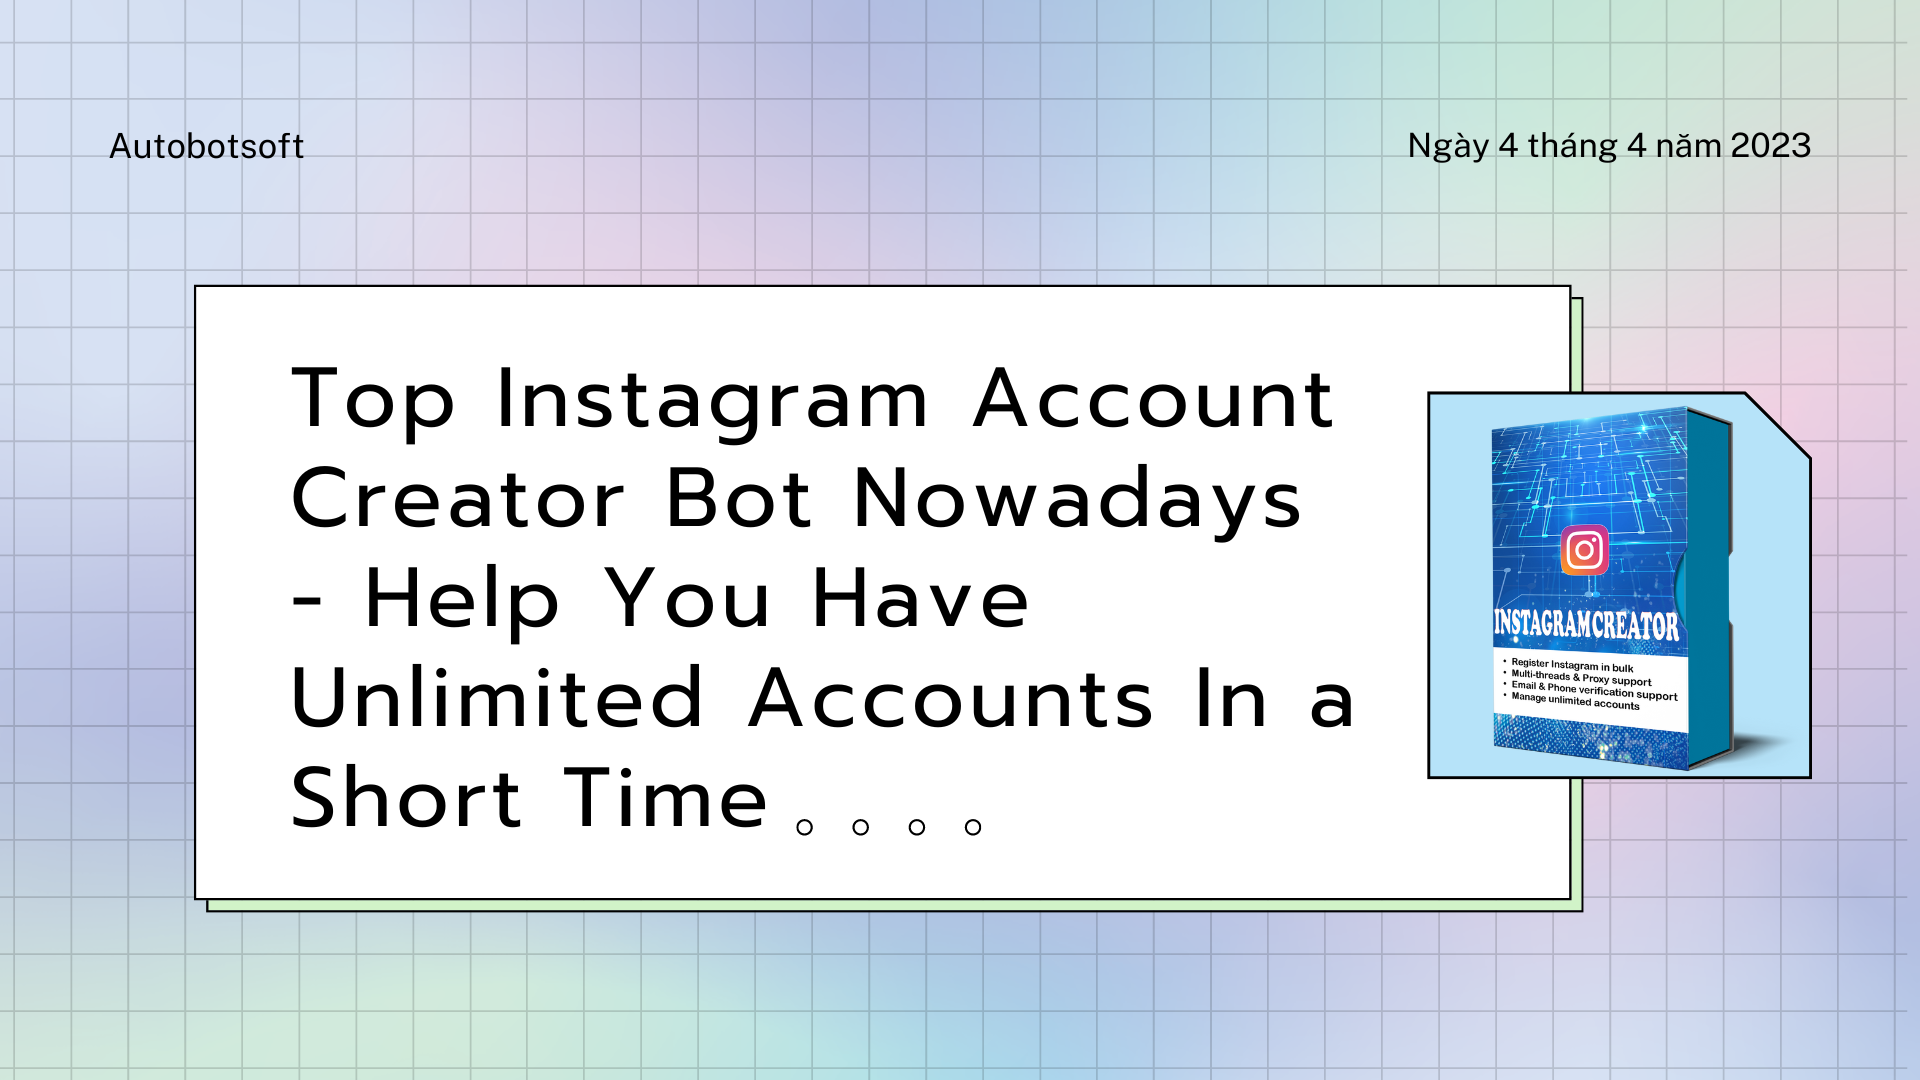 Top Instagram Account Creator Bot Nowadays – Help You Have Unlimited Accounts In a Short Time